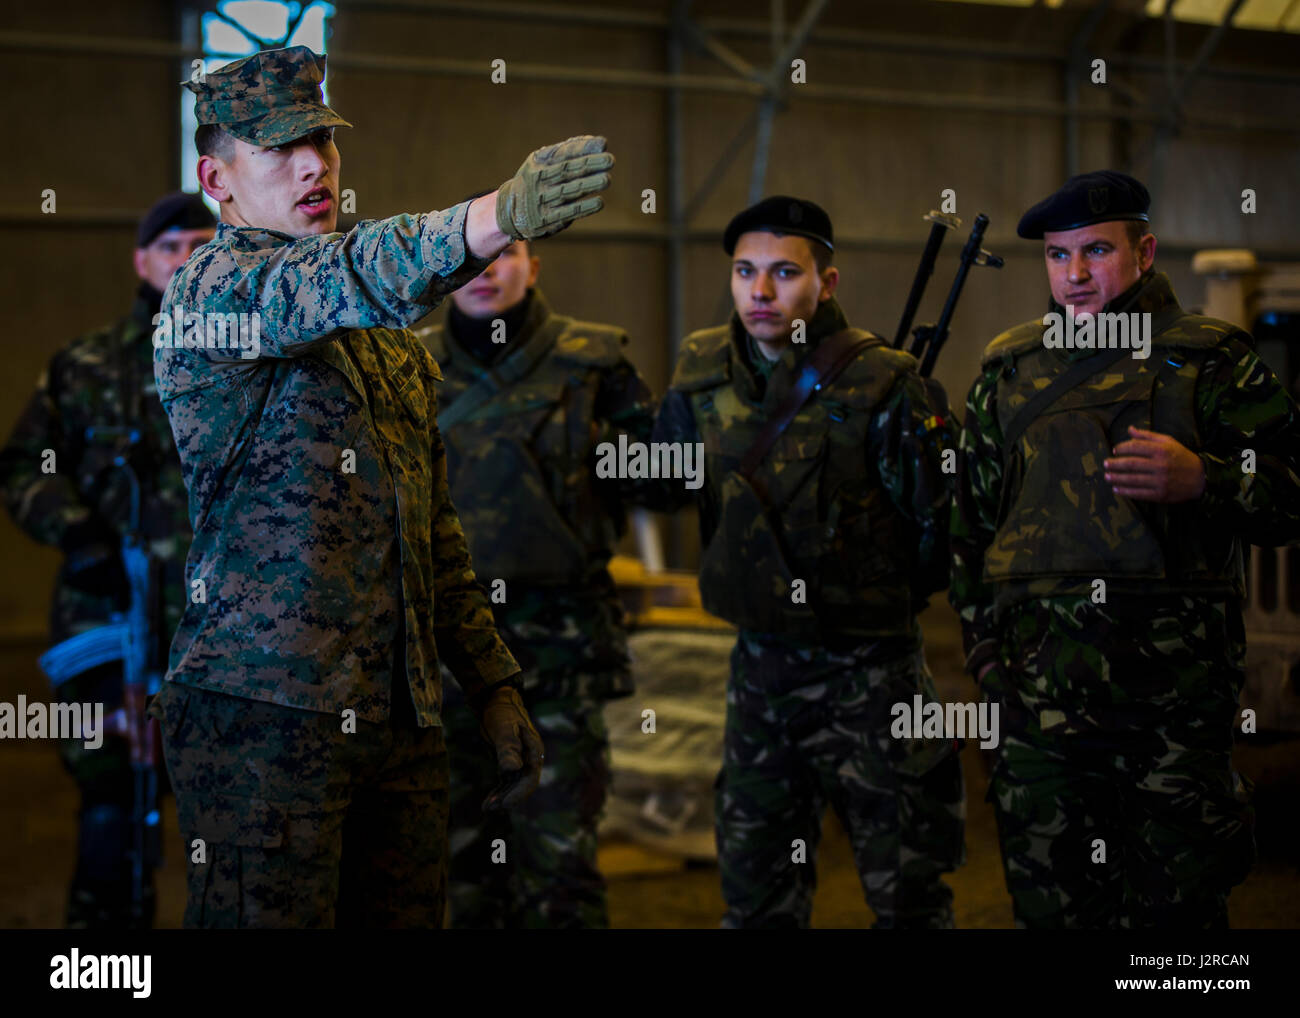 U.S. Marine Cpl. Eduardo Duran-Espino, a rifleman with Marine Rotational Force Europe 17.1, gives a hand-and-arm signal class with Romanian soldiers at Babadag Training Area, Romania, April 24, 2017. Marines trained with Romanian soldiers and other Allies during Exercise Platinum Eagle 17.2 to improve interoperability. Partnerships formed from multilateral exercises like this are crucial in dealing with regional issues and keeping peace in the Eastern European region. (U.S. Marine Corps photo by Lance Cpl. Sarah N. Petrock) Stock Photo